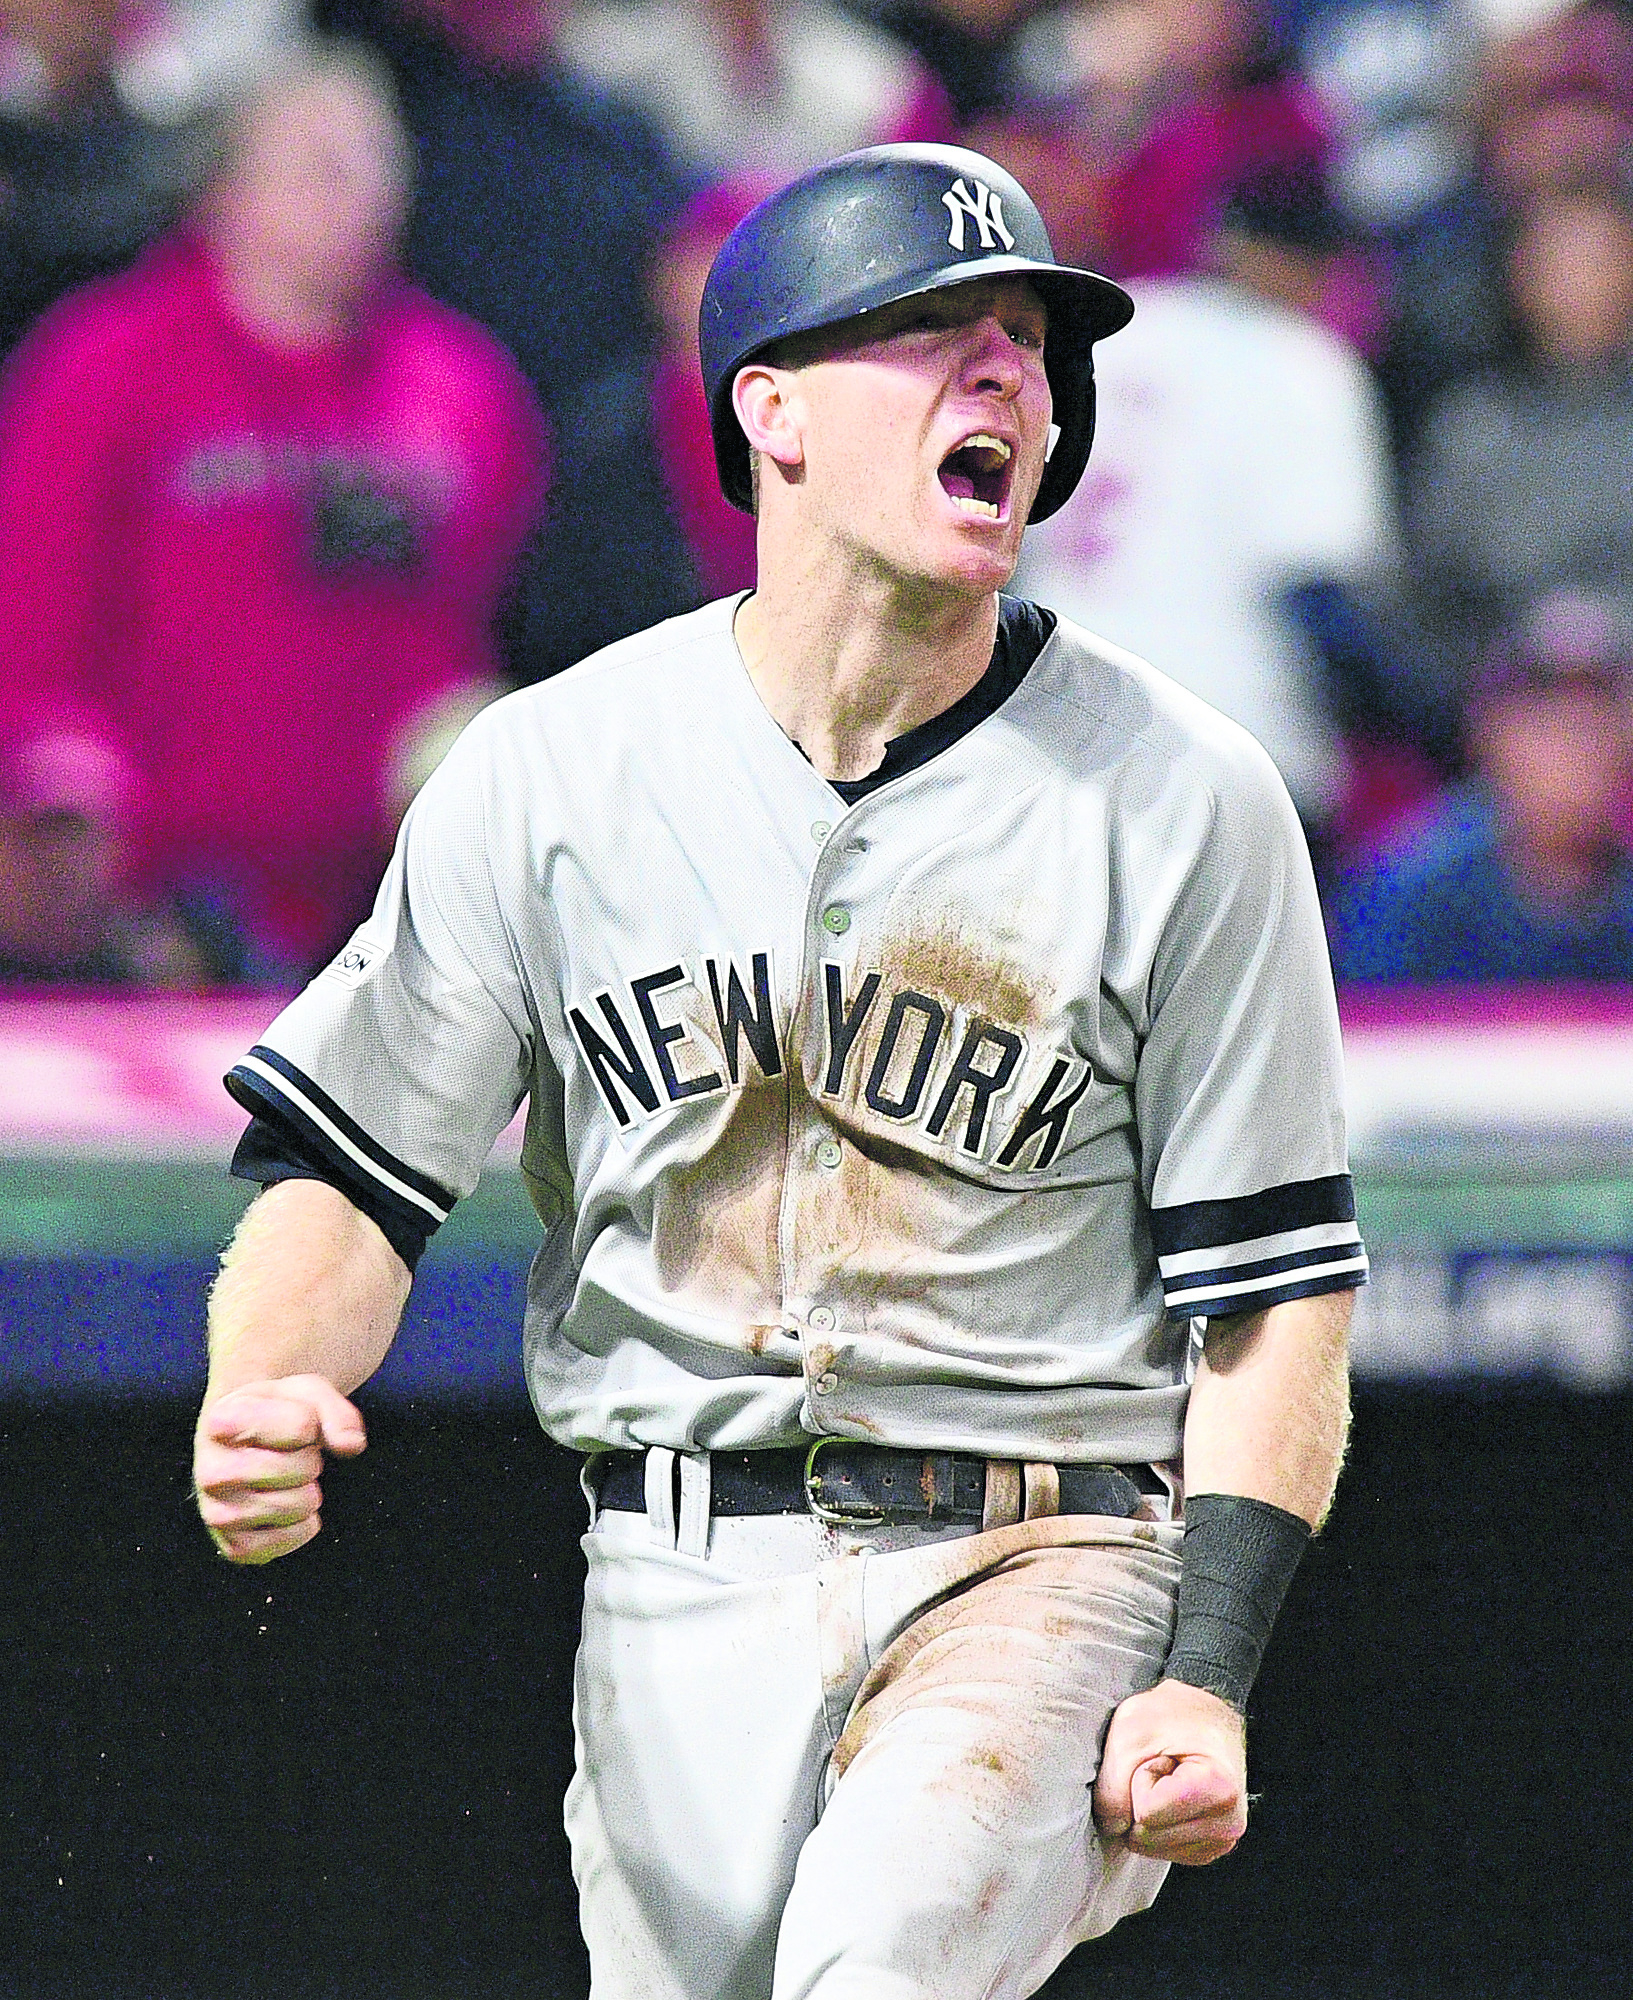 3B Todd Frazier, Mets agree on $17M, 2-year deal - Aruba Today